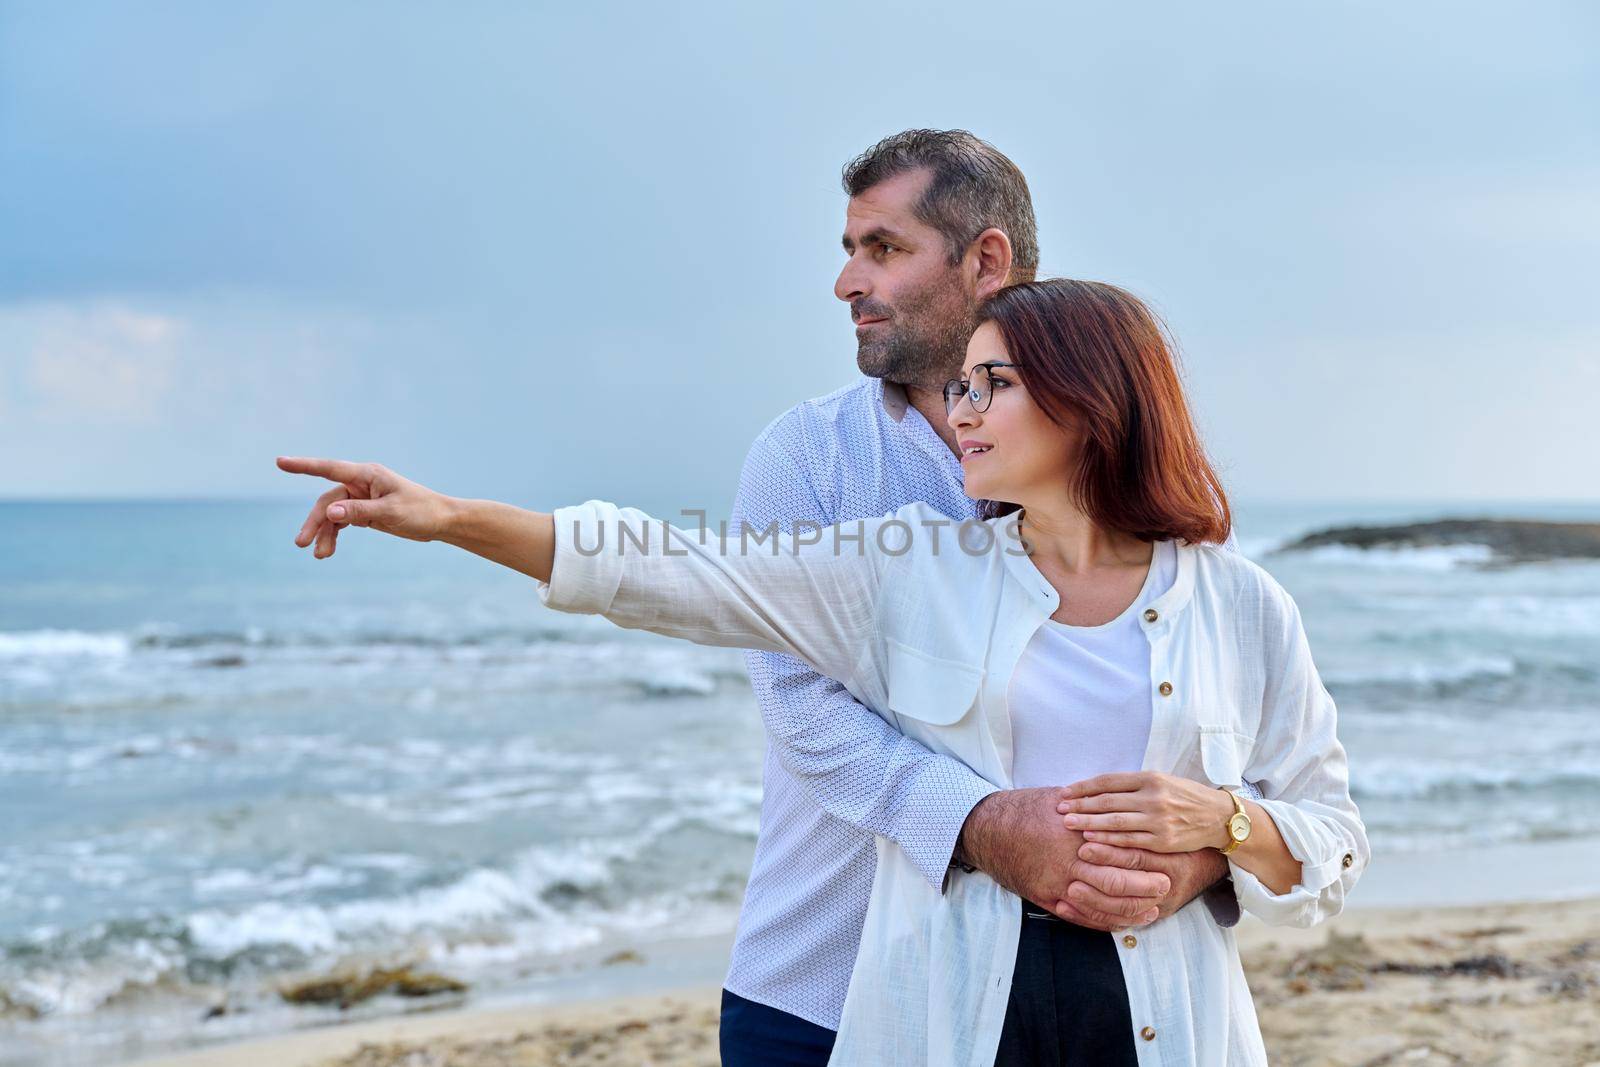 Outdoor portrait of mature couple hugging on beach, background of sea nature, copy space. Middle-aged happy romantic man and woman. Relationships, feelings, lifestyle, marriage, family, people concept